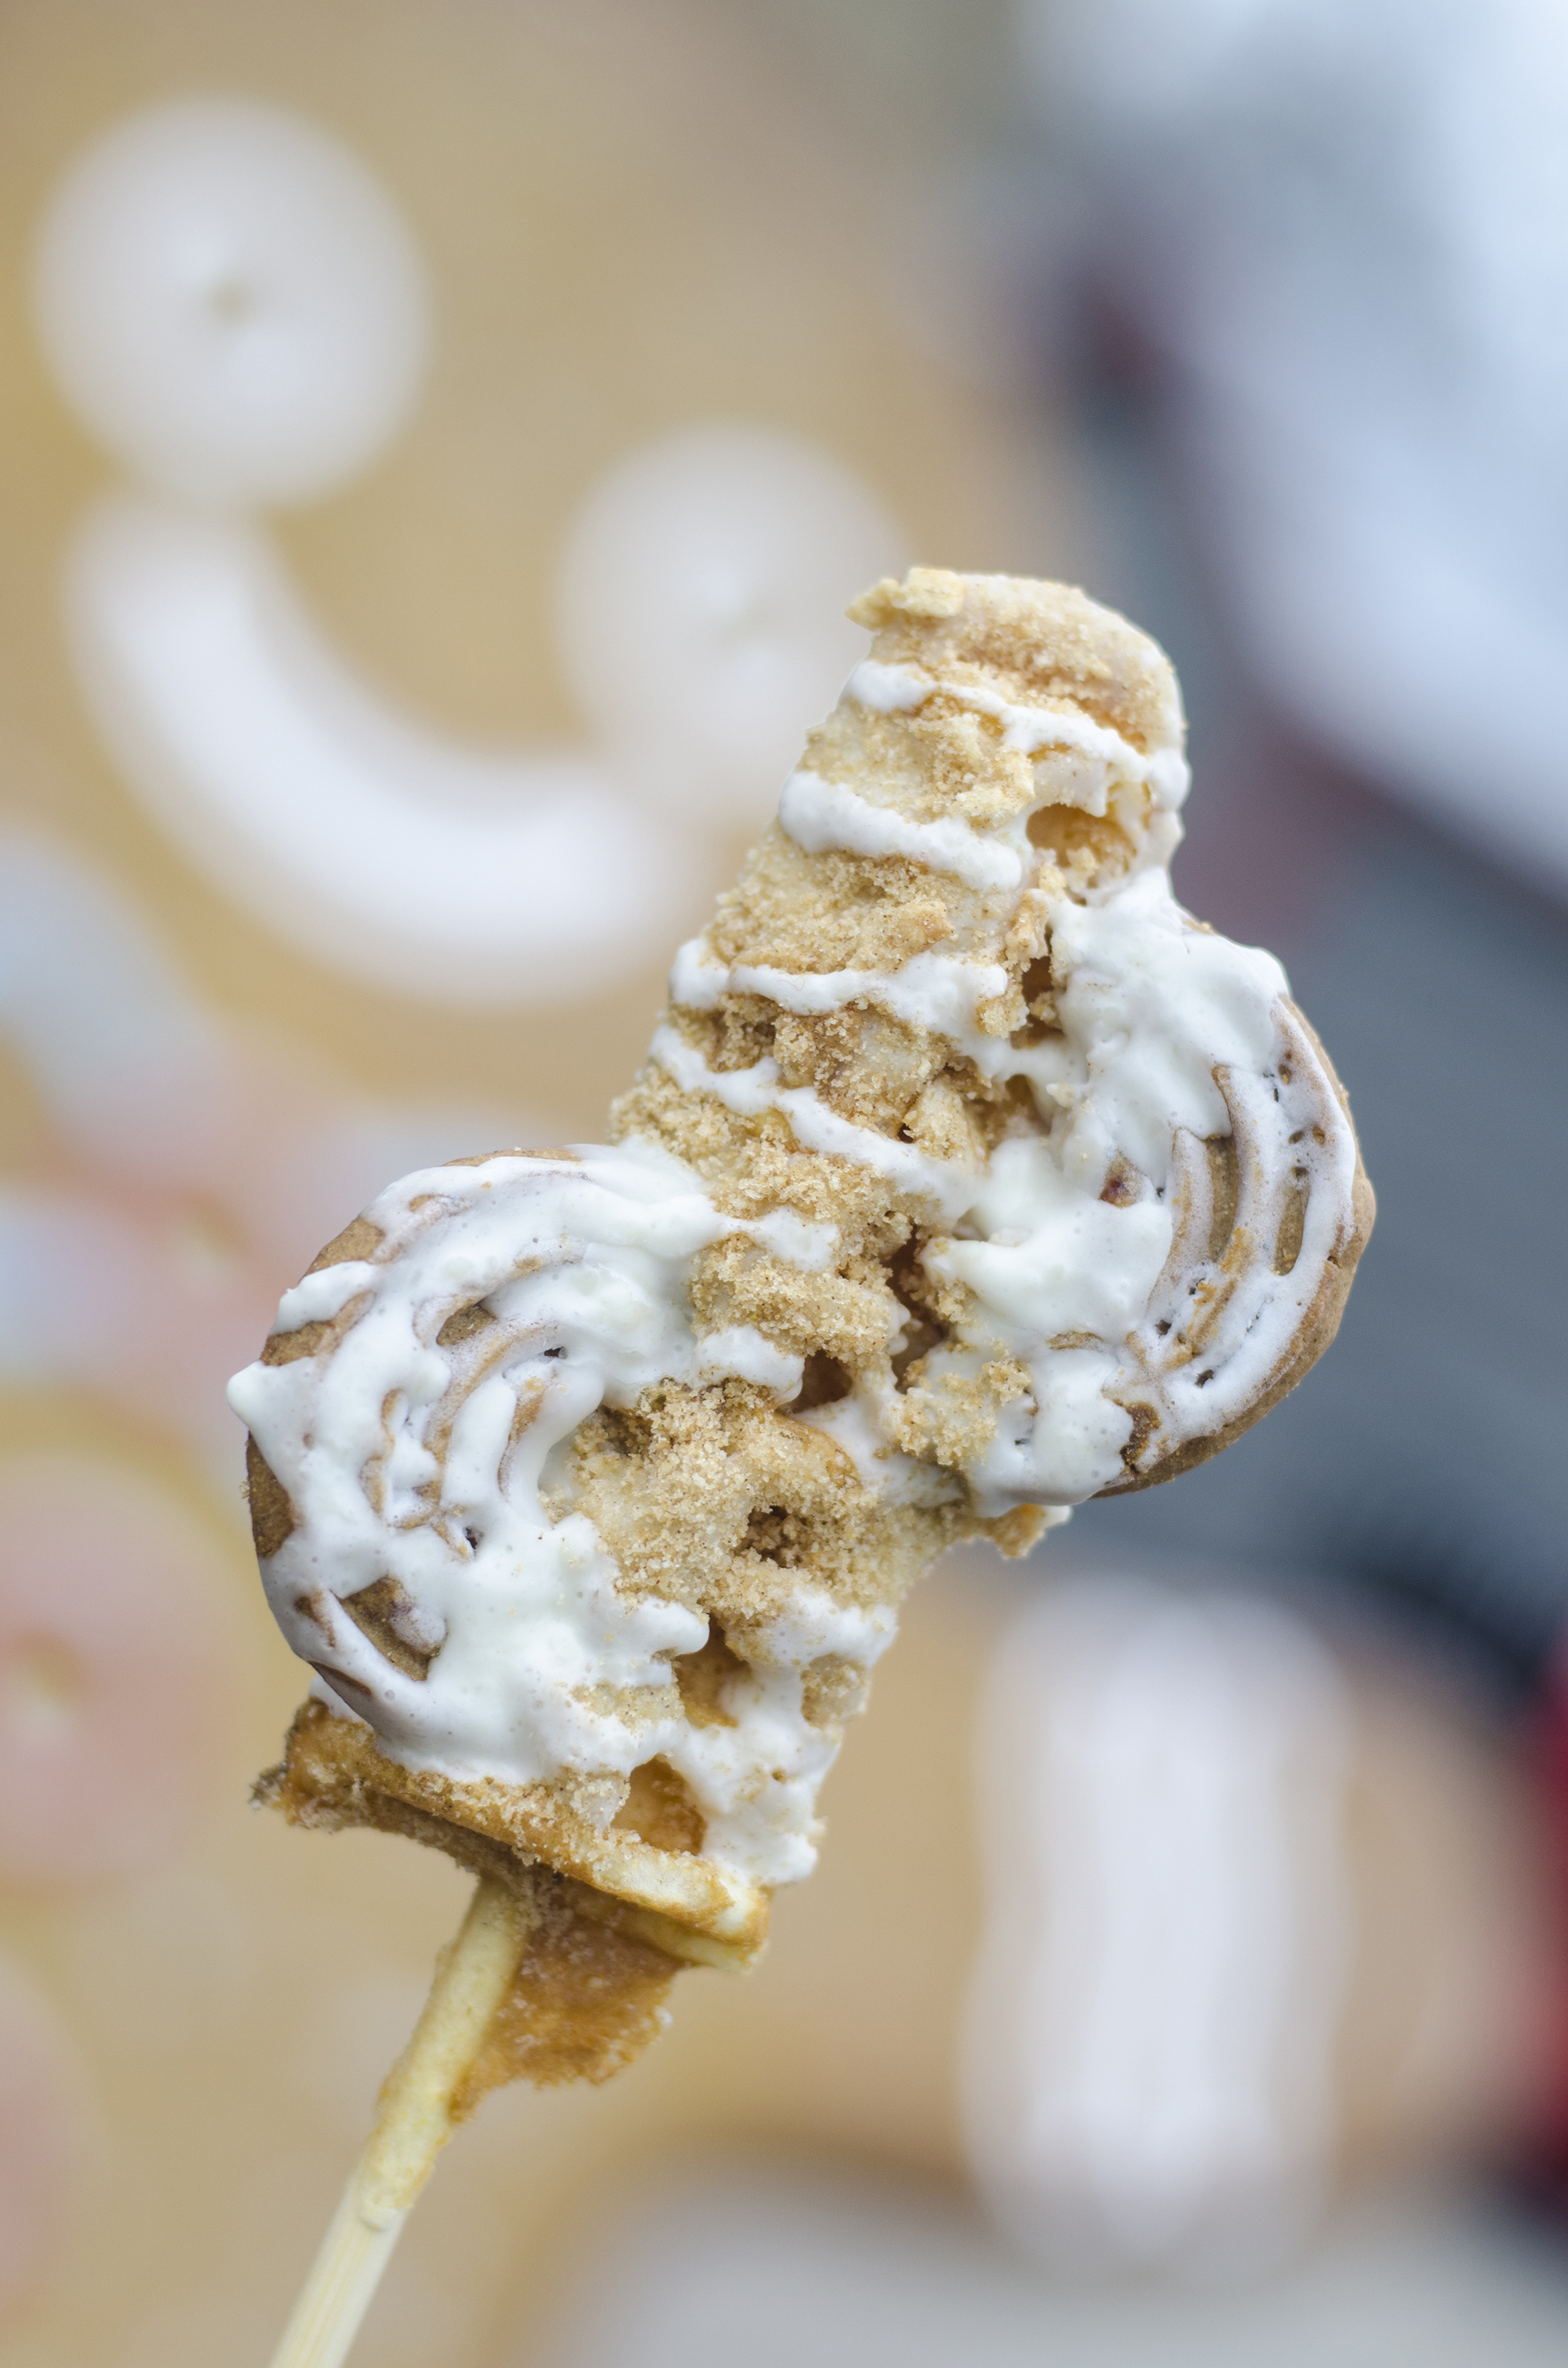 Our Cinnamon Roll Waffle is a cinnamon spice waffle dipped in white chocolate and coated with smashed cinnamon toast crunch cereal.